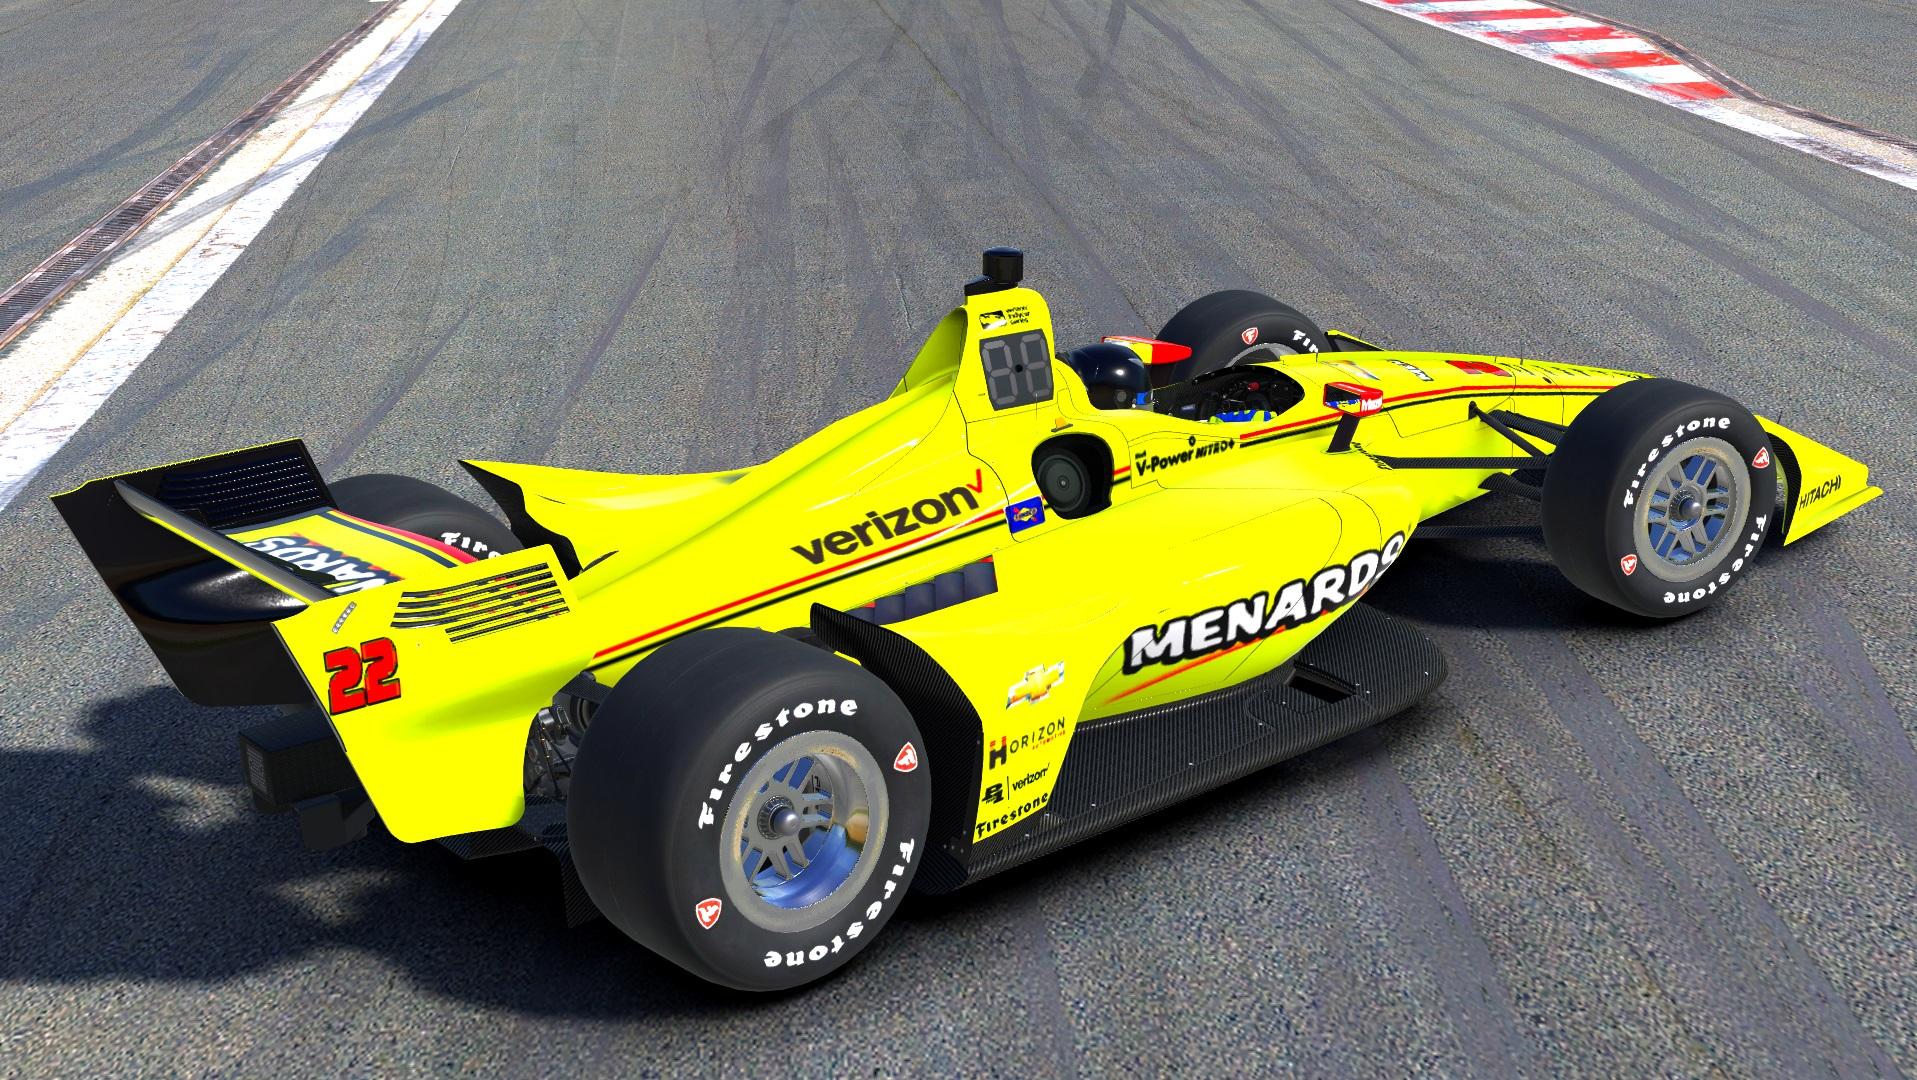 Preview of 2018 Menards Pagenaud by John Paquin